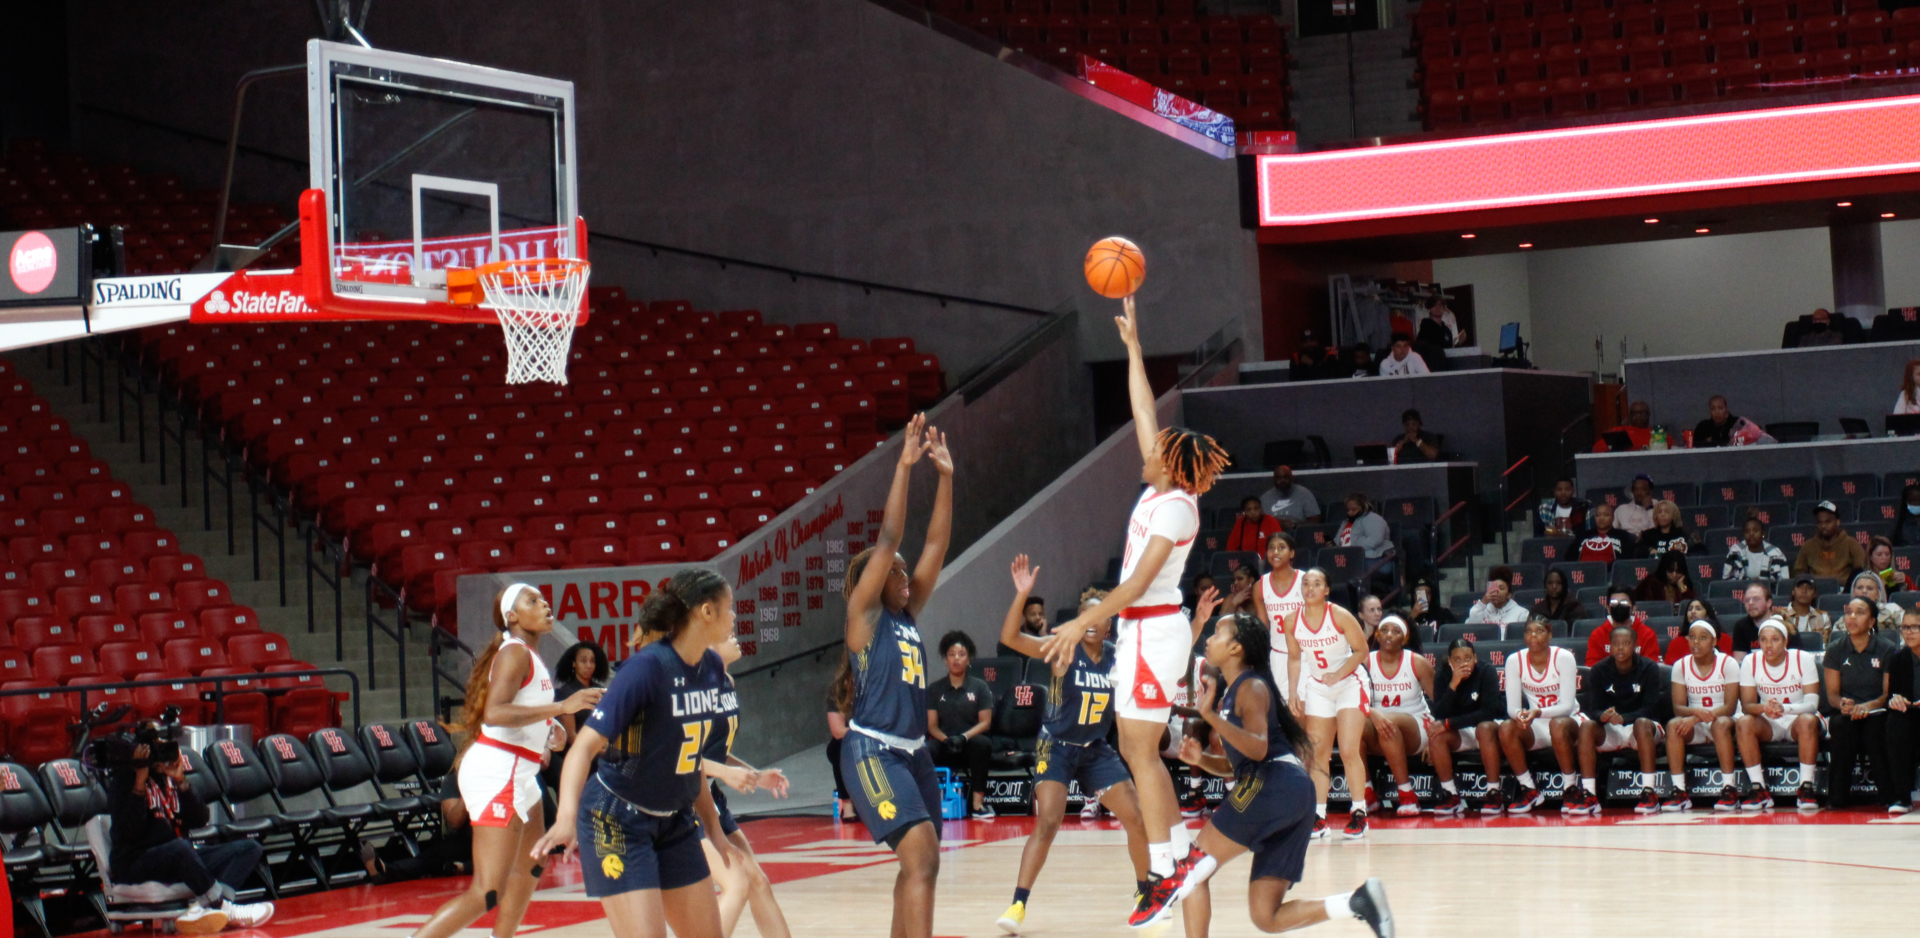 UH junior guard Britney Onyeje scored 14 points in the Cougars' victory over New Mexico on Saturday. | Esther Umoh/The Cougar